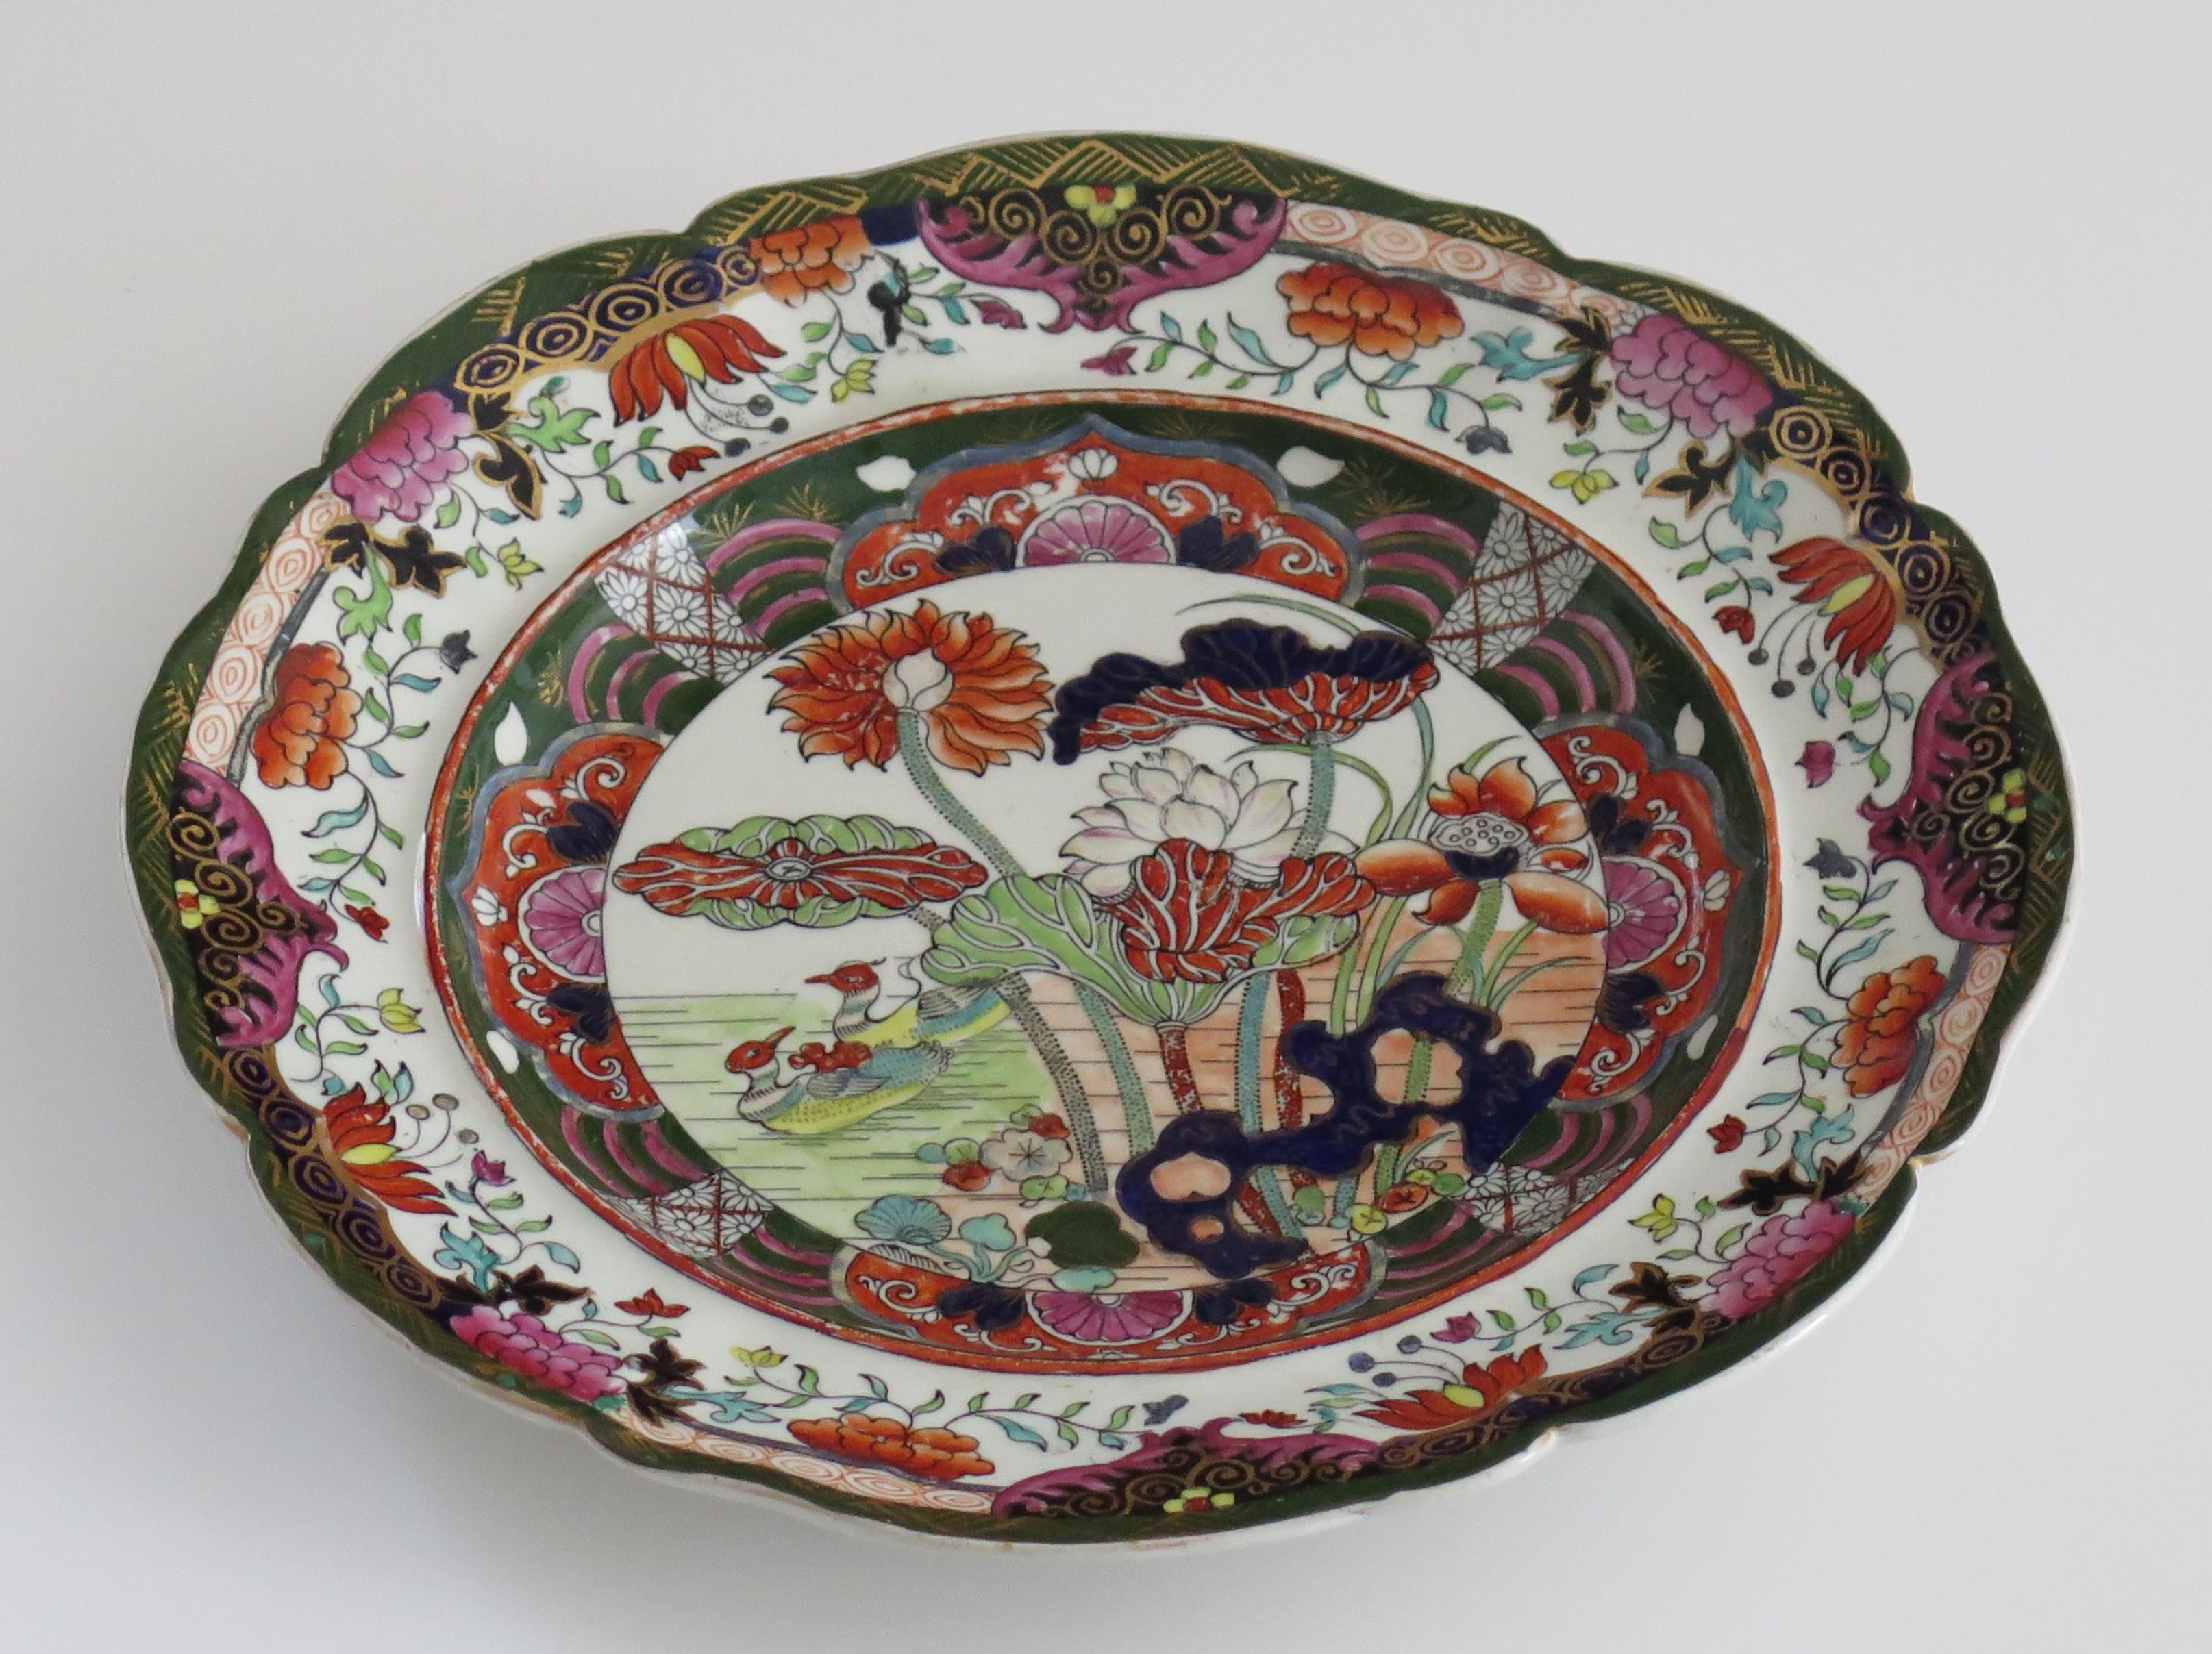 Chinoiserie Mason's Ironstone Large Dinner Plate in rare Muscove Duck Pattern, circa 1825